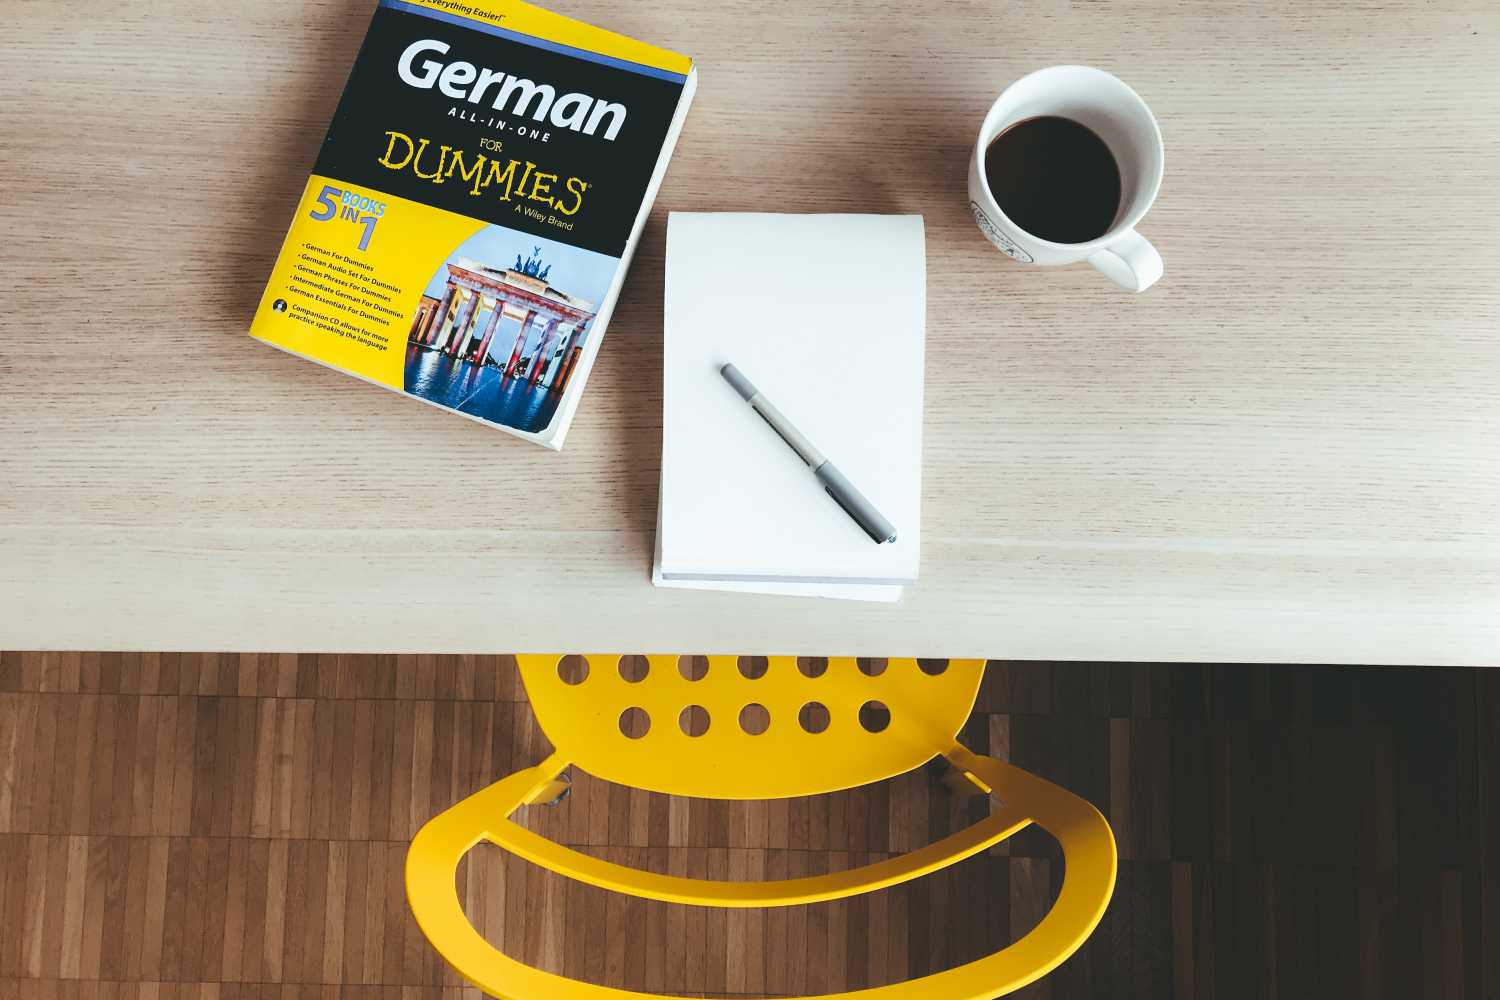 Denglisch: The English words that will make you sound German